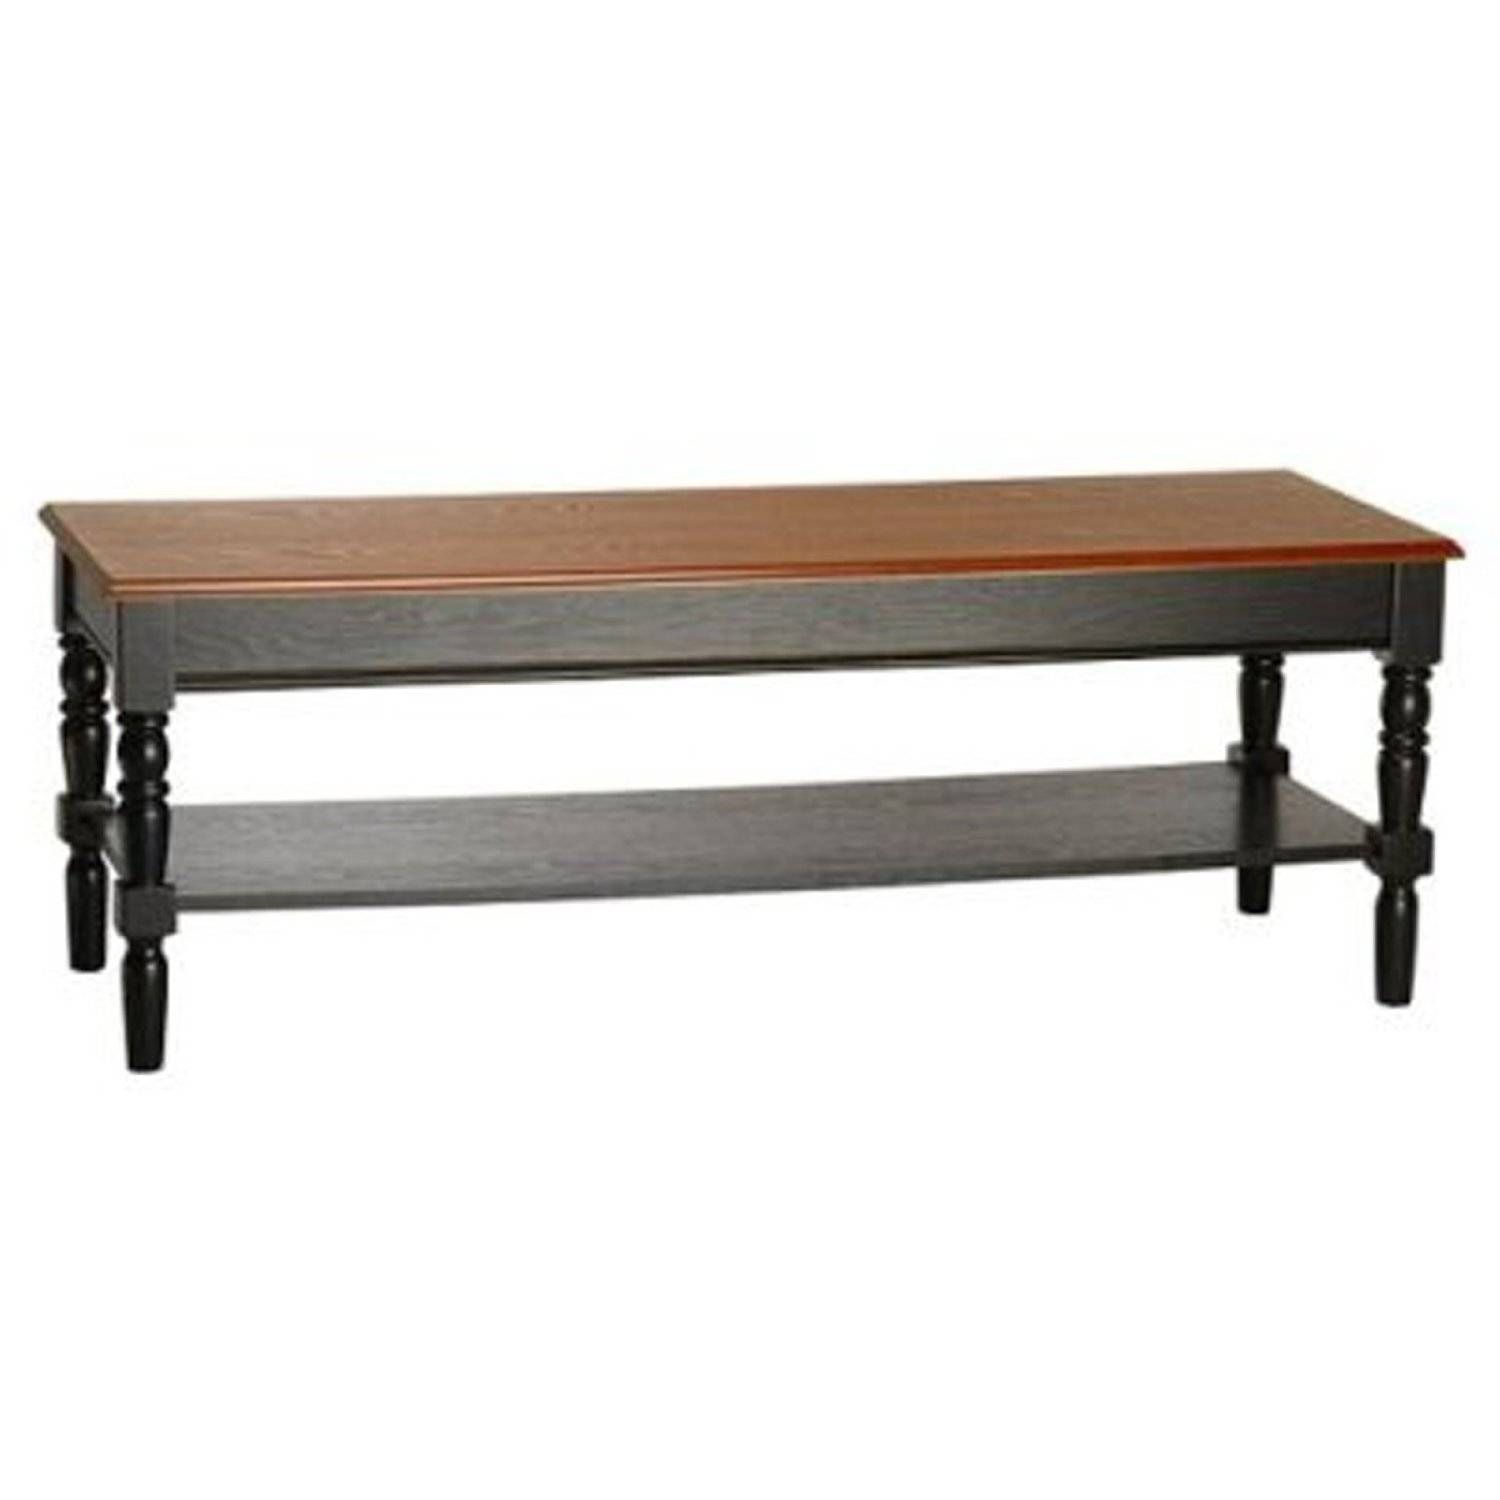 Furniture: Cool Narrow Coffee Table For Awesome Living Room Ideas Regarding Narrow Coffee Tables (View 1 of 30)